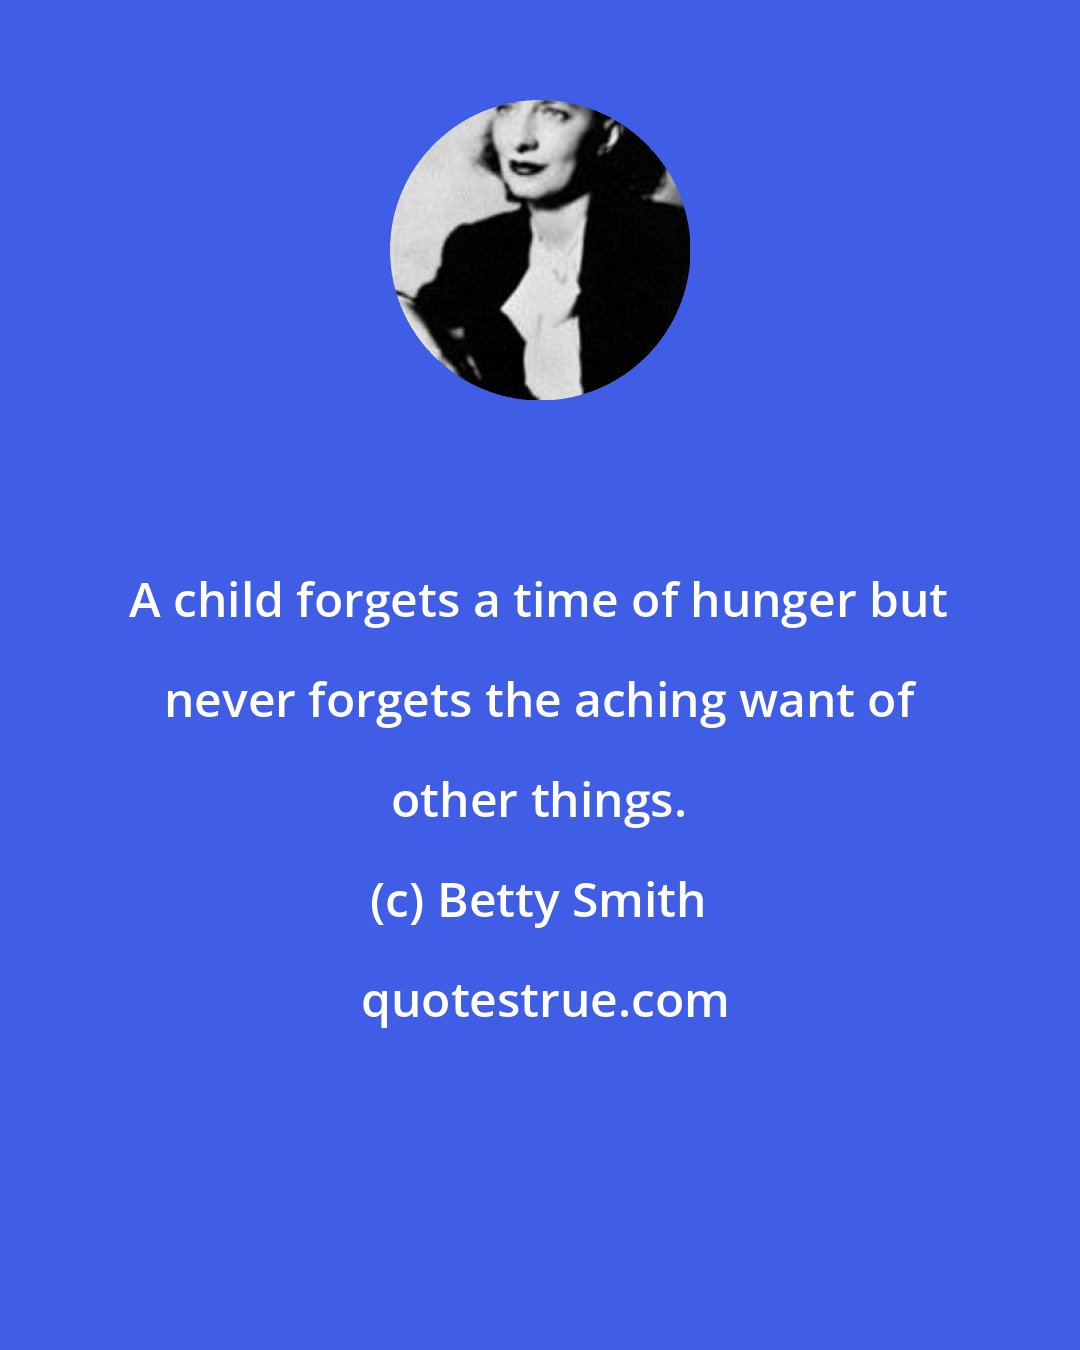 Betty Smith: A child forgets a time of hunger but never forgets the aching want of other things.